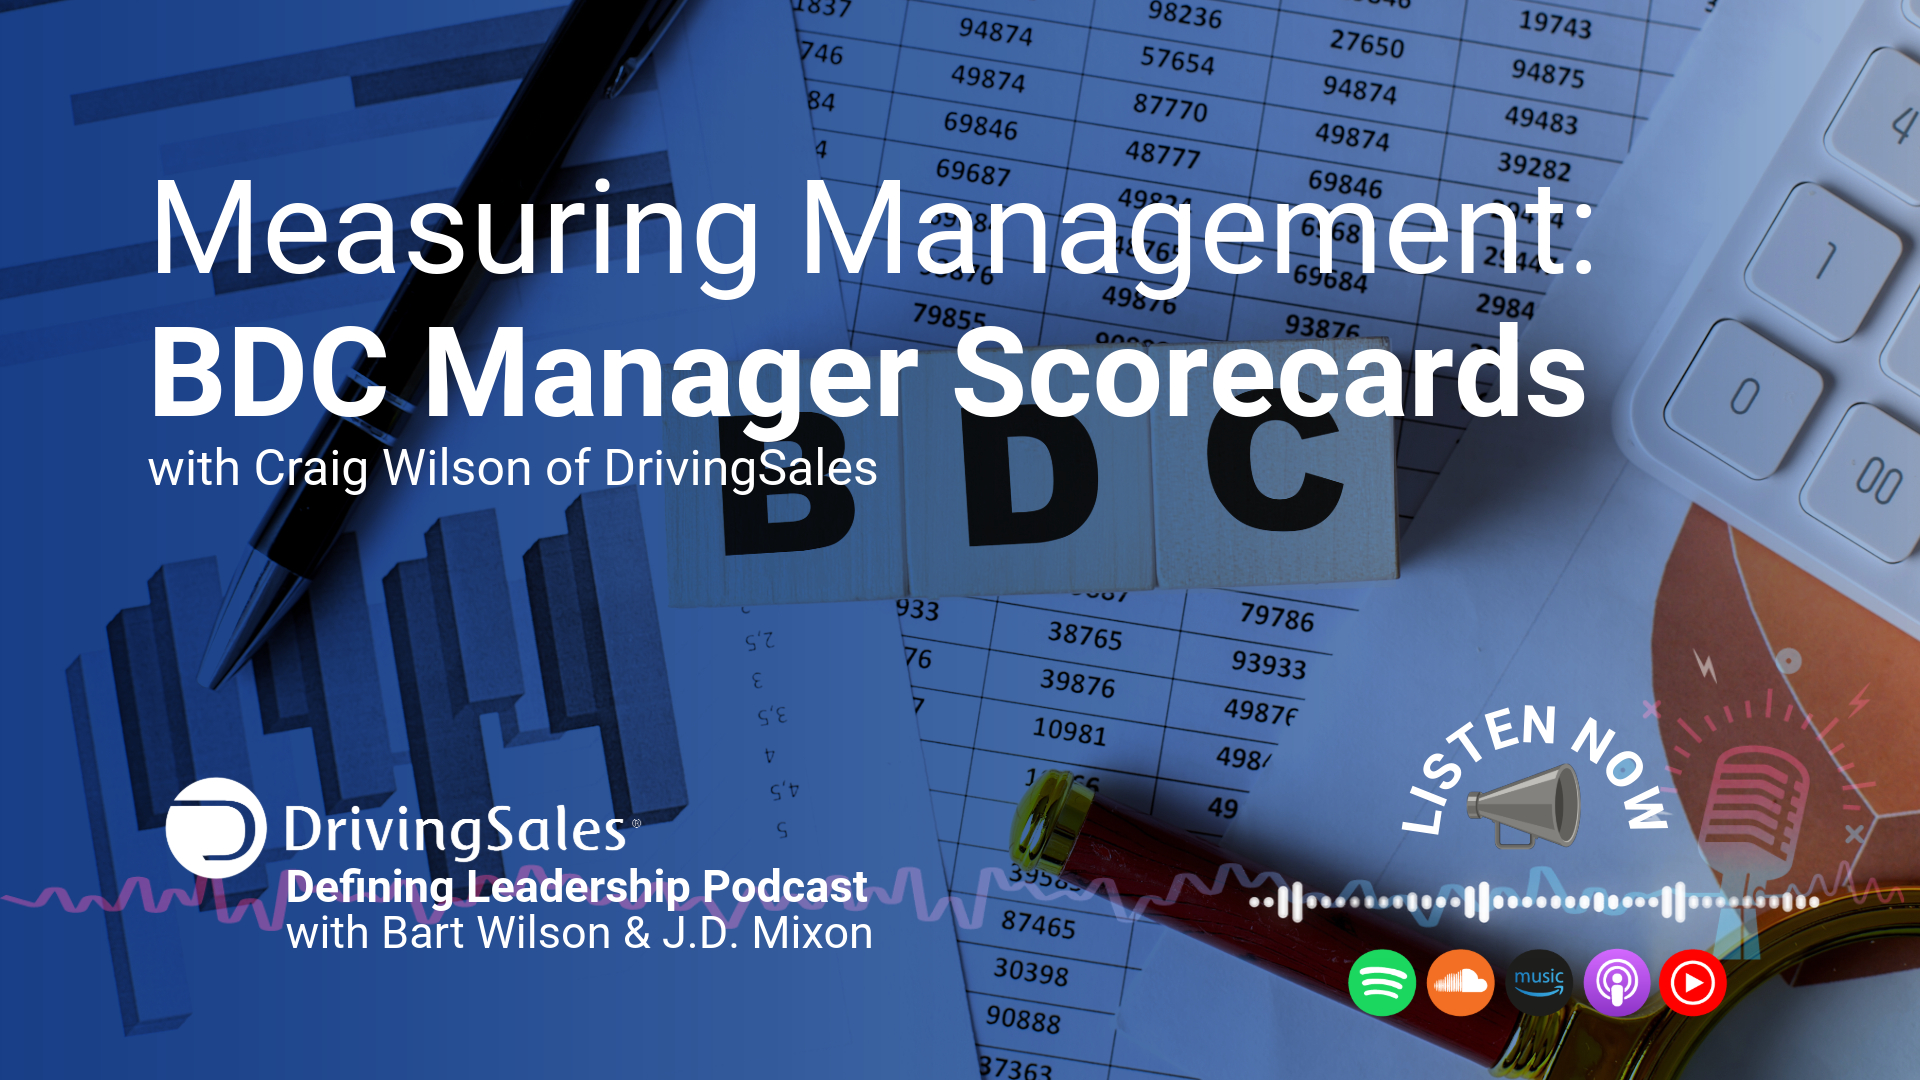 Episode thumbnail for the DrivingSales Defining Leadership Podcast titled 'Measuring Management: BDC Manager Scorecards' covering how to create a BDC manager scorecard featuring Craig Wilson of DrivingSales. The image includes a background with graphs, numbers, a pen, and a keyboard. The podcast hosts are Bart Wilson and J.D. Mixon. The thumbnail also displays the DrivingSales logo and icons for Spotify, SoundCloud, Apple Podcasts, and other platforms.